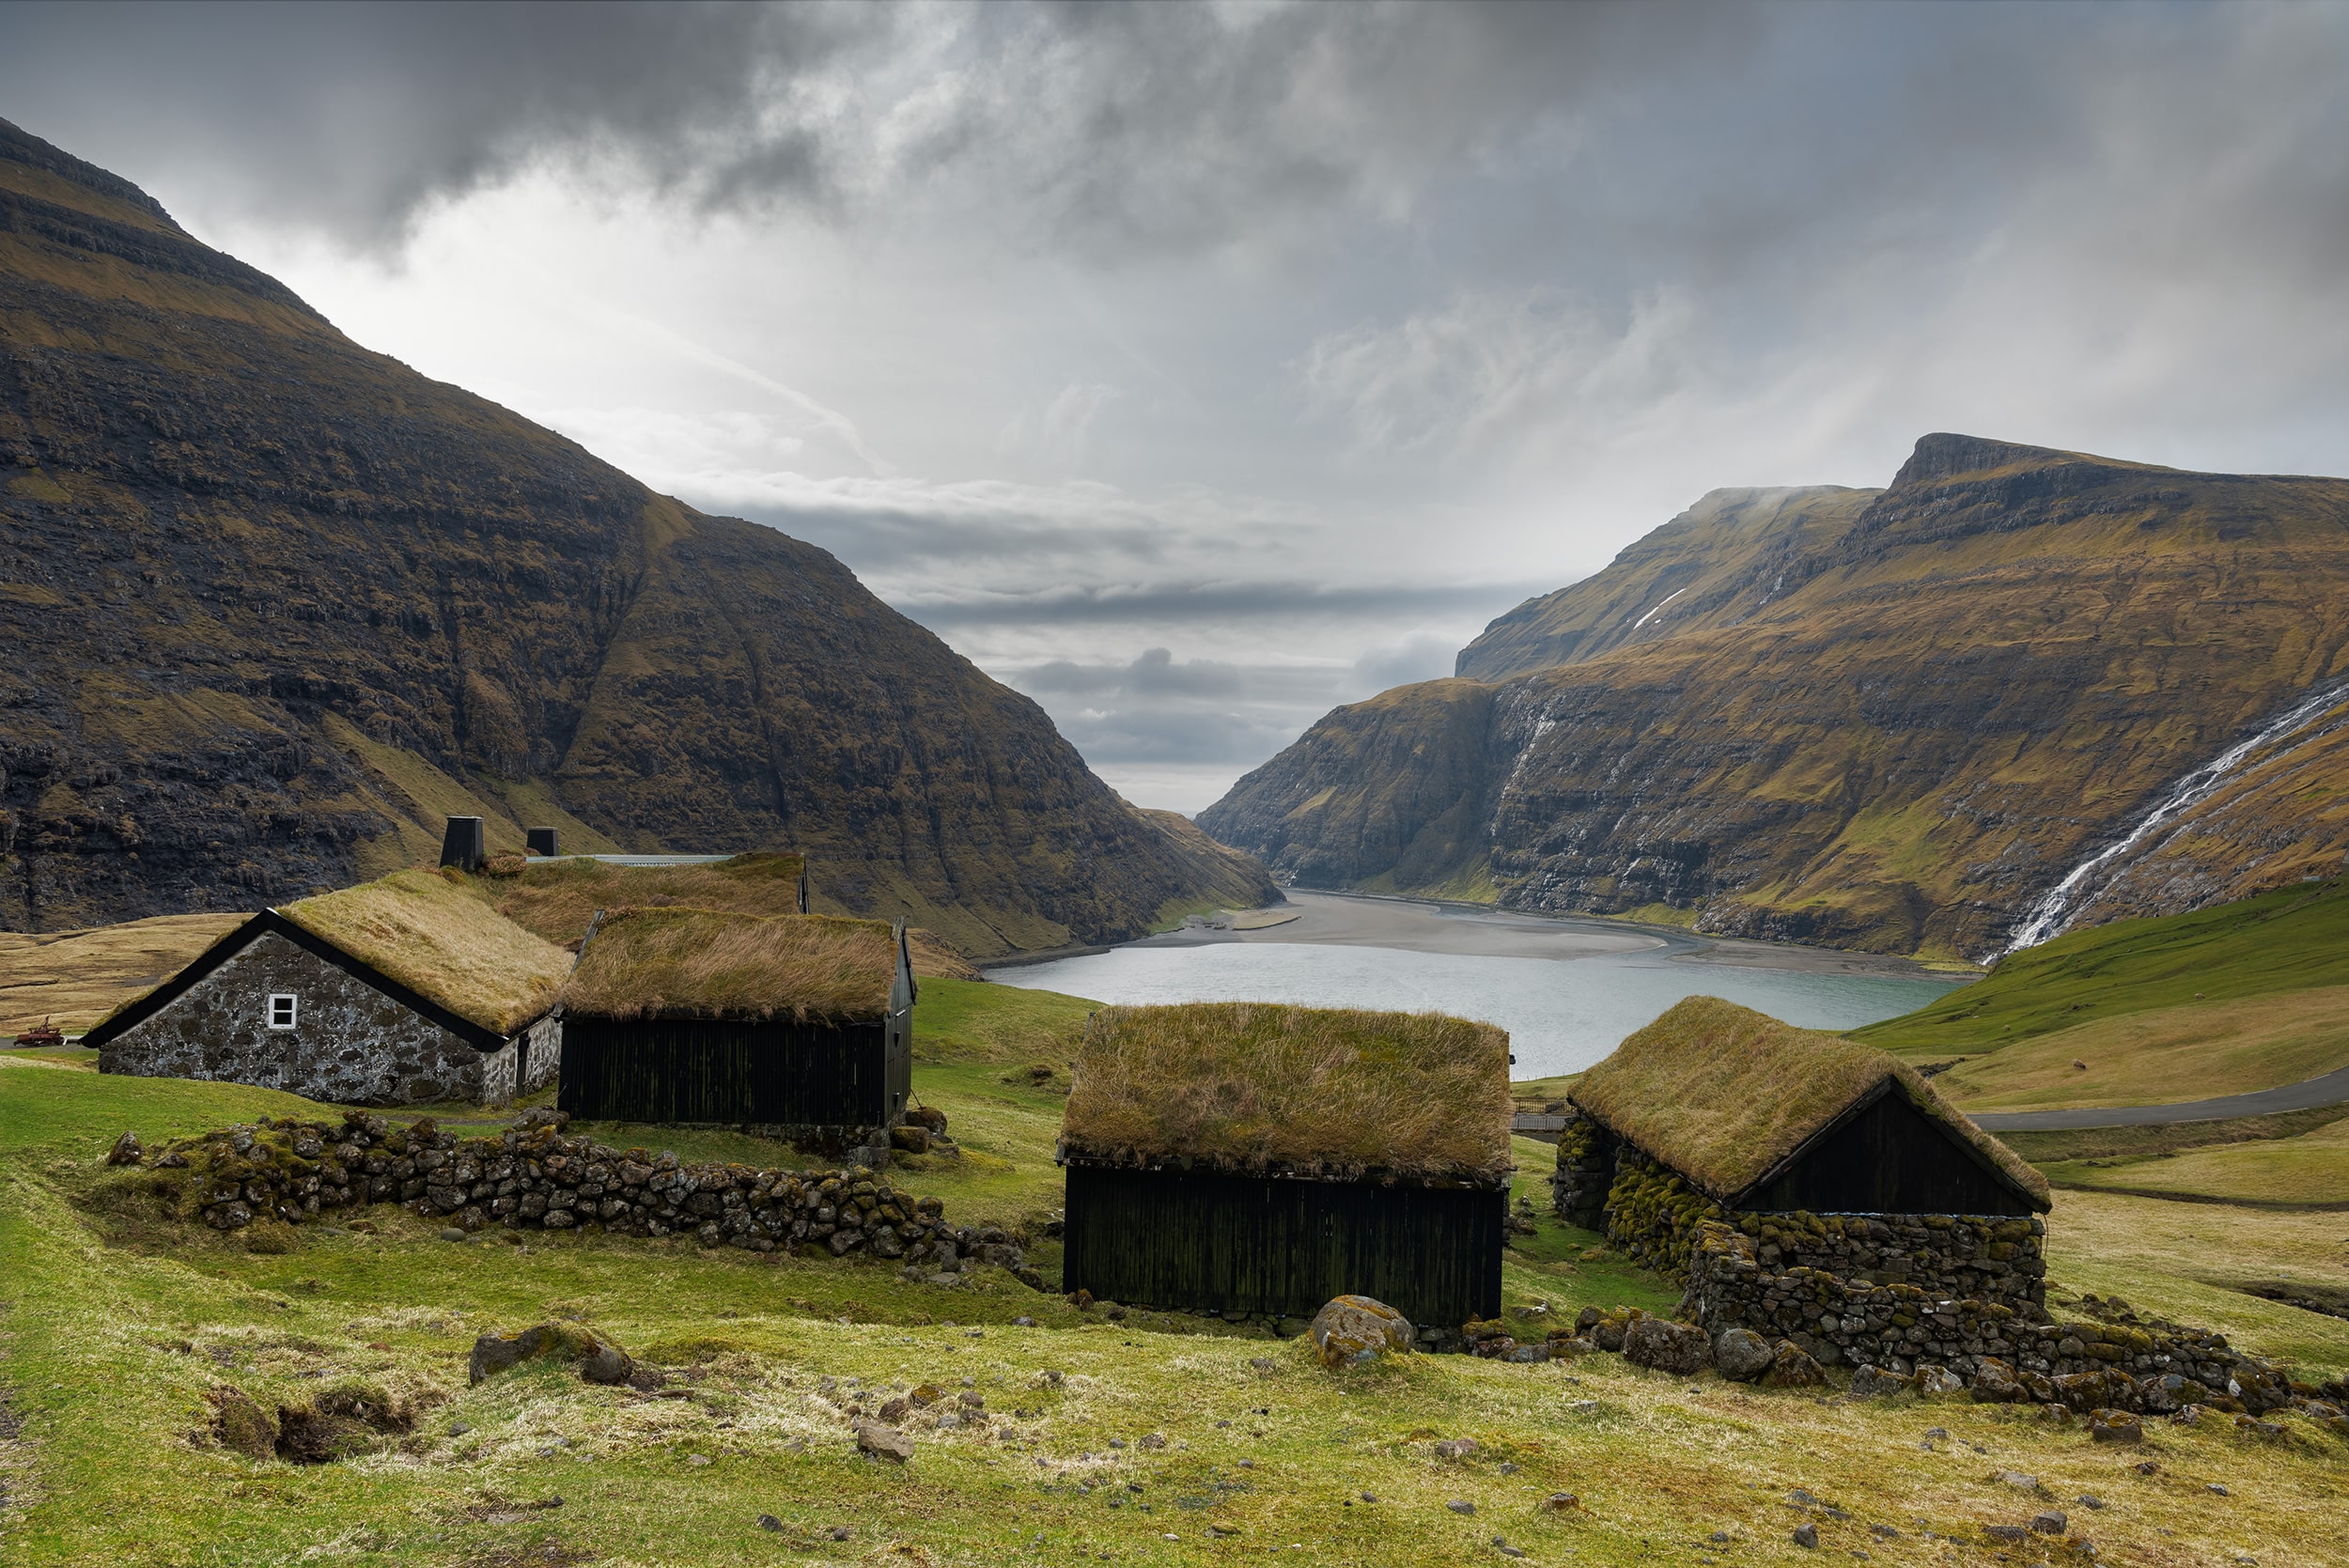 Explore the picturesque village of Saksun nestled amidst the stunning landscapes of the Faroe Islands through captivating landscape photography captured by Jennifer Esseiva. Admire the unique charm of the grass-roofed houses set against the rugged backdrop of Eysturoy island. Immerse yourself in the timeless beauty of this remote village as depicted in this mesmerizing image.